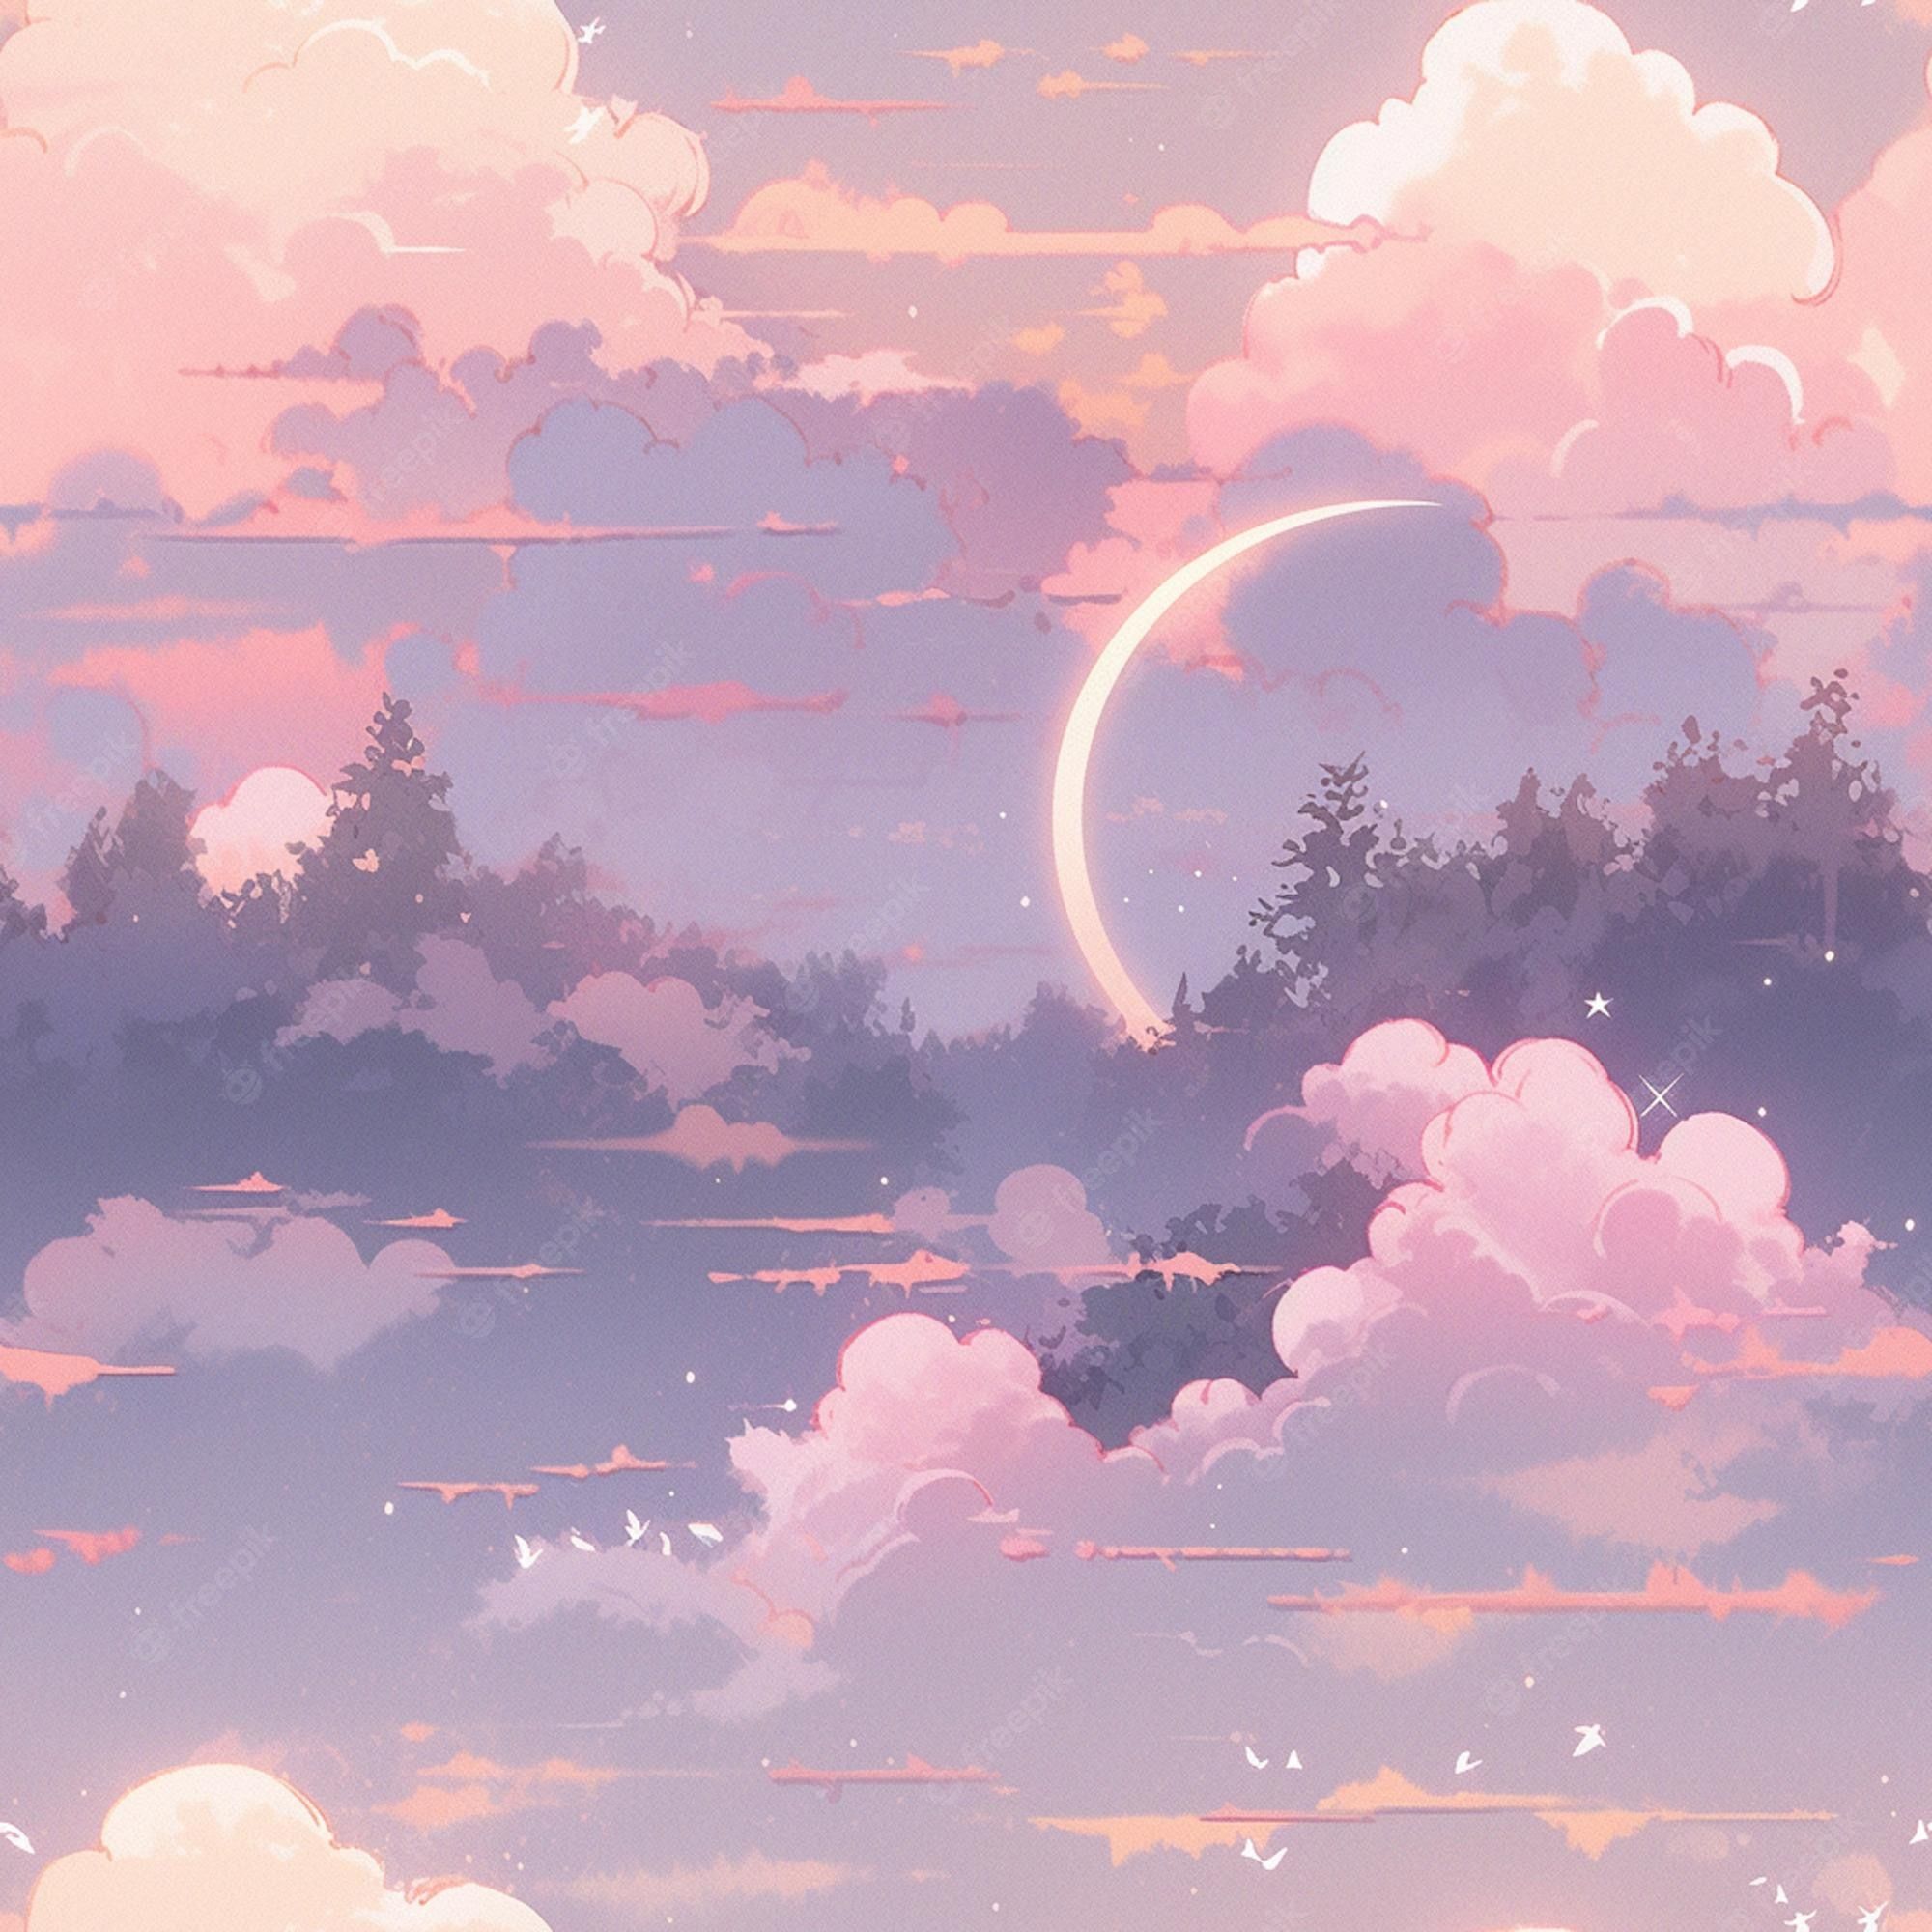 Aesthetic wallpaper background of pink clouds and the moon - Beautiful